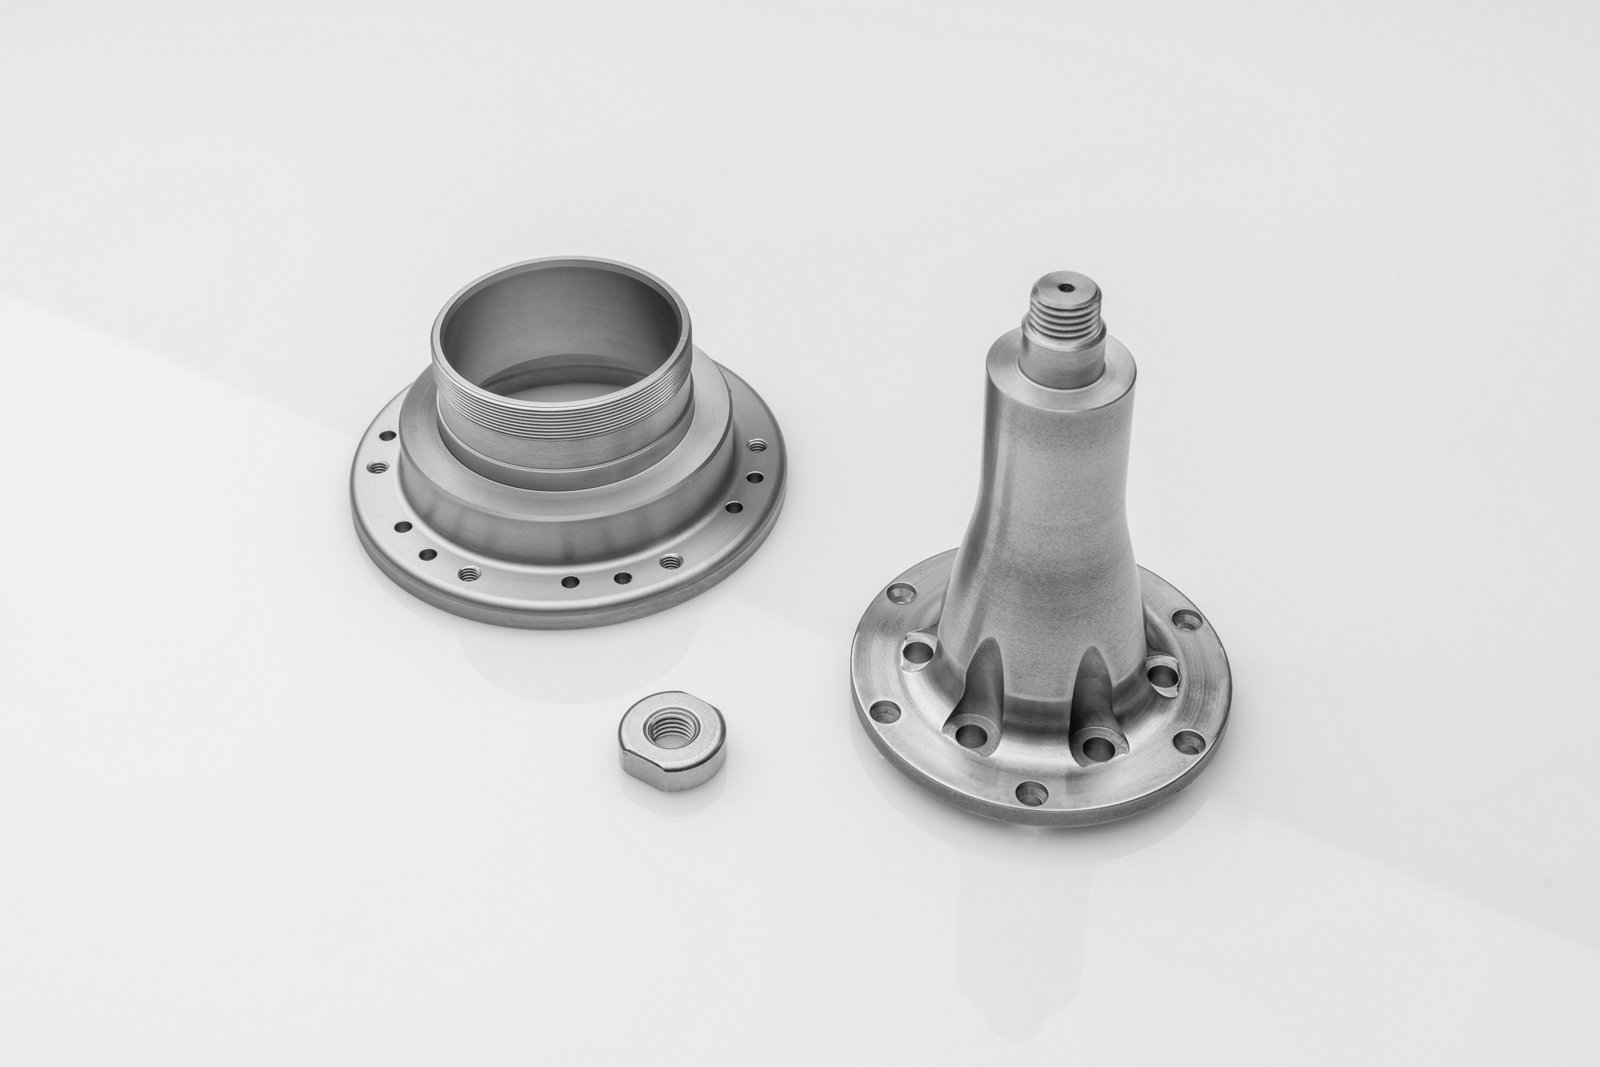 Drive components for X-ray tubes